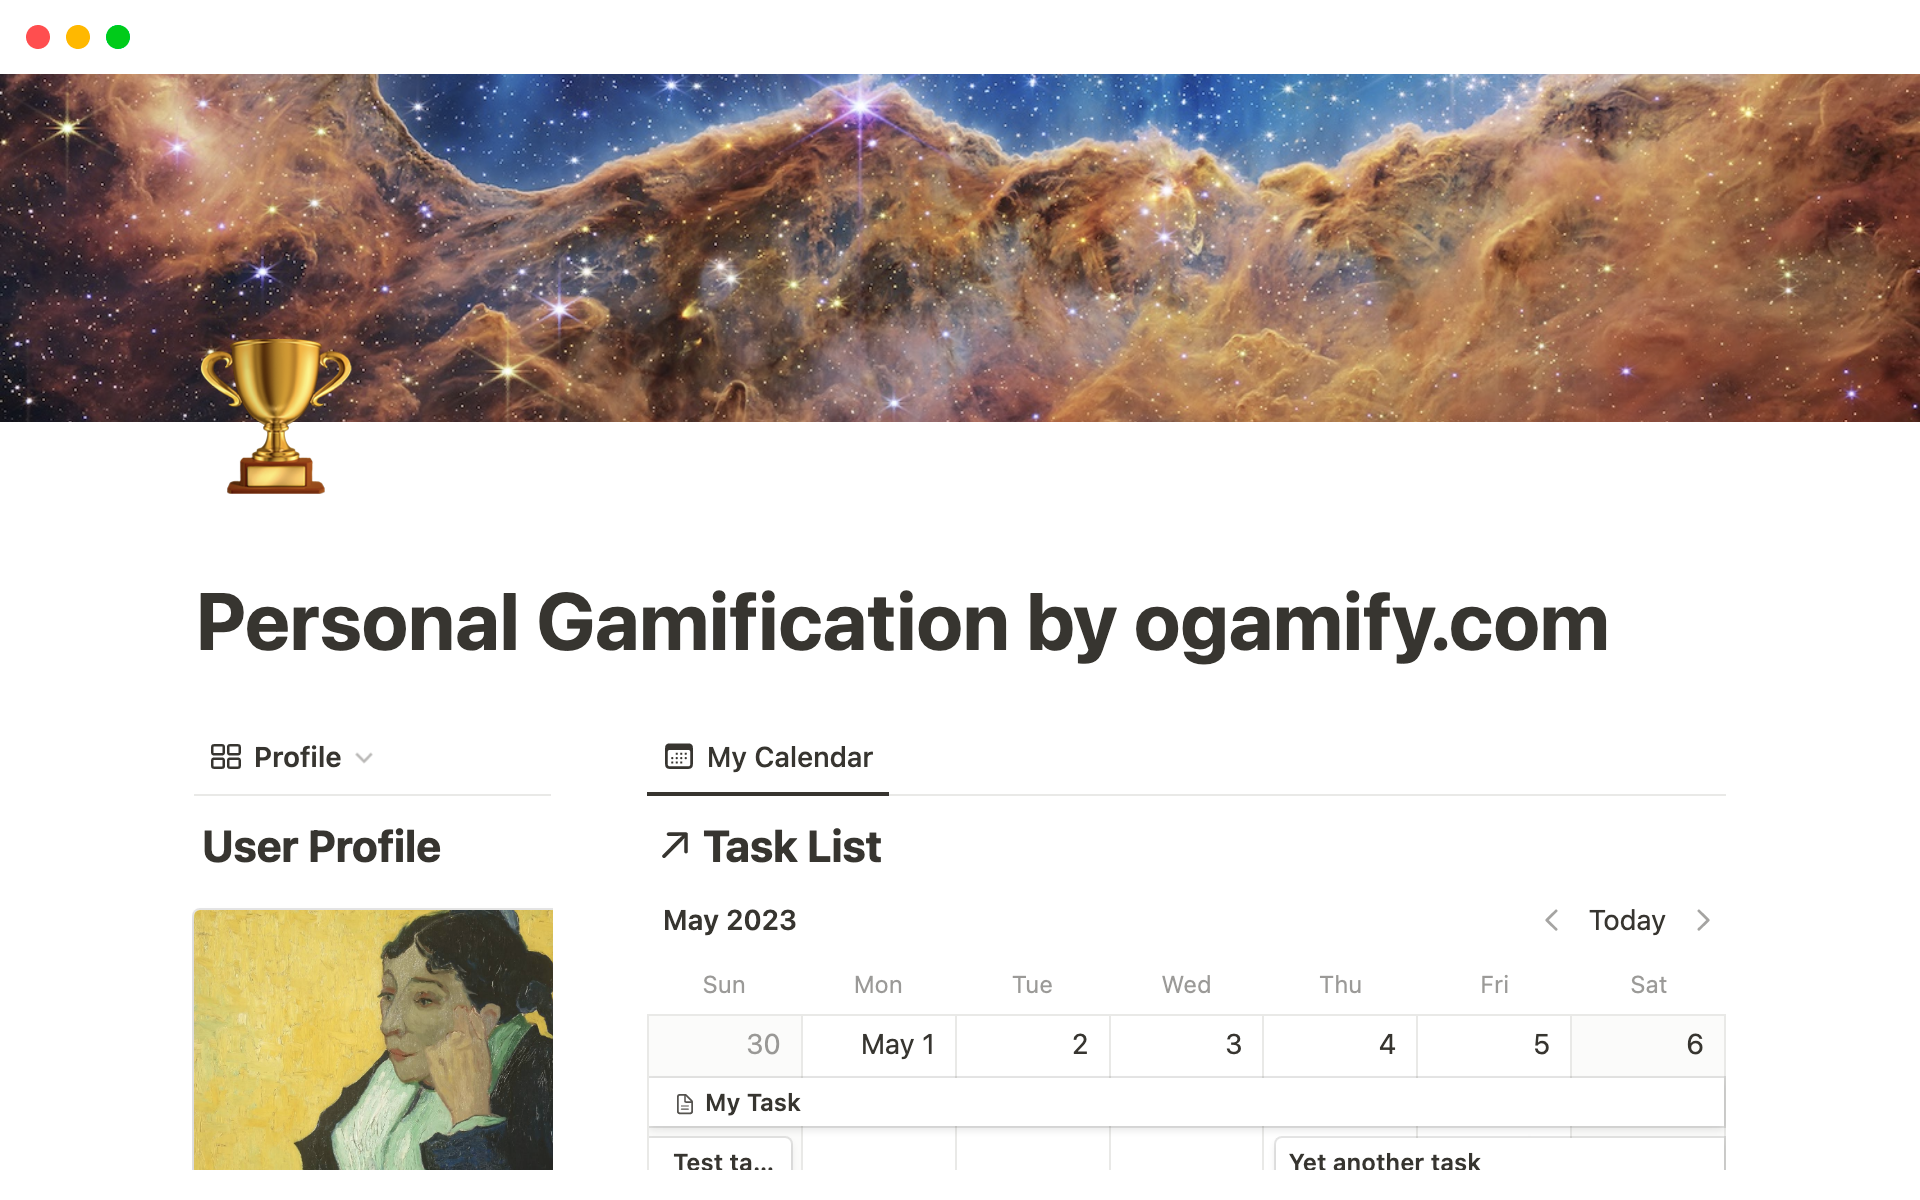 This template is a simple daily planner gamification, which helps staying in focus and track progress of the planned tasks in exchange for user specified rewards.